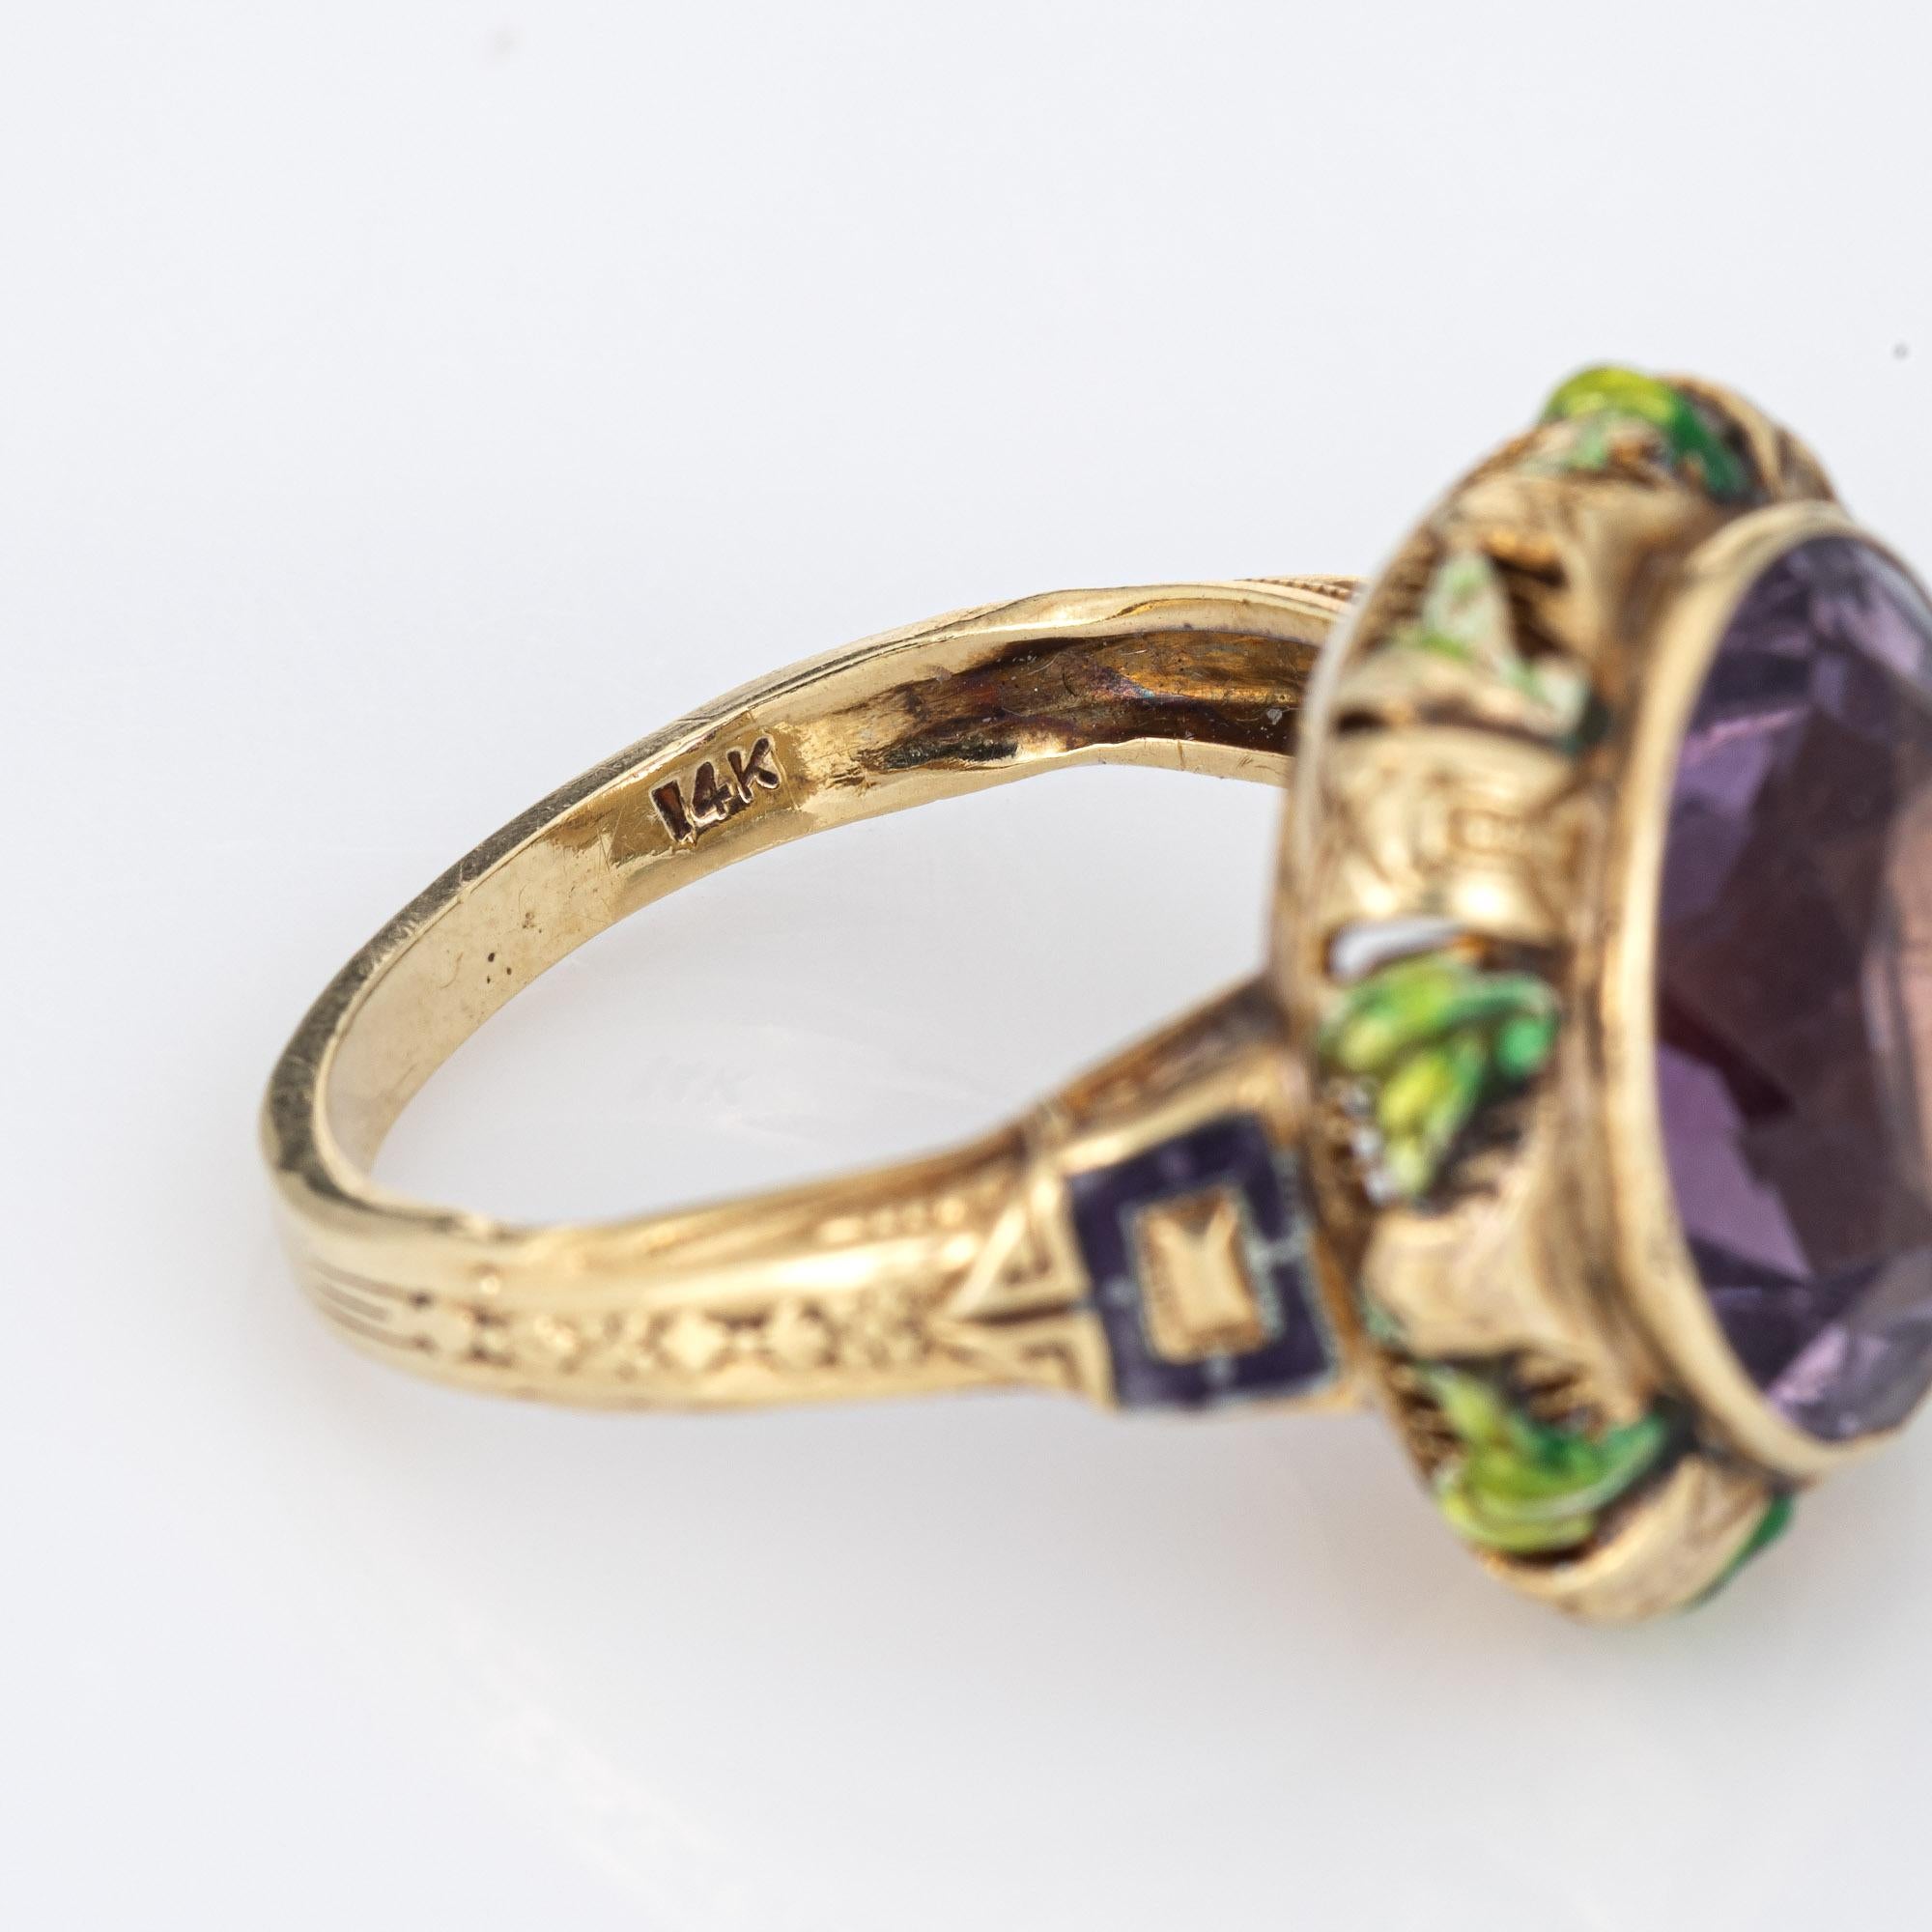 Vintage Art Deco Green Enamel Ring Amethyst 14k Yellow Gold Leaves In Good Condition For Sale In Torrance, CA